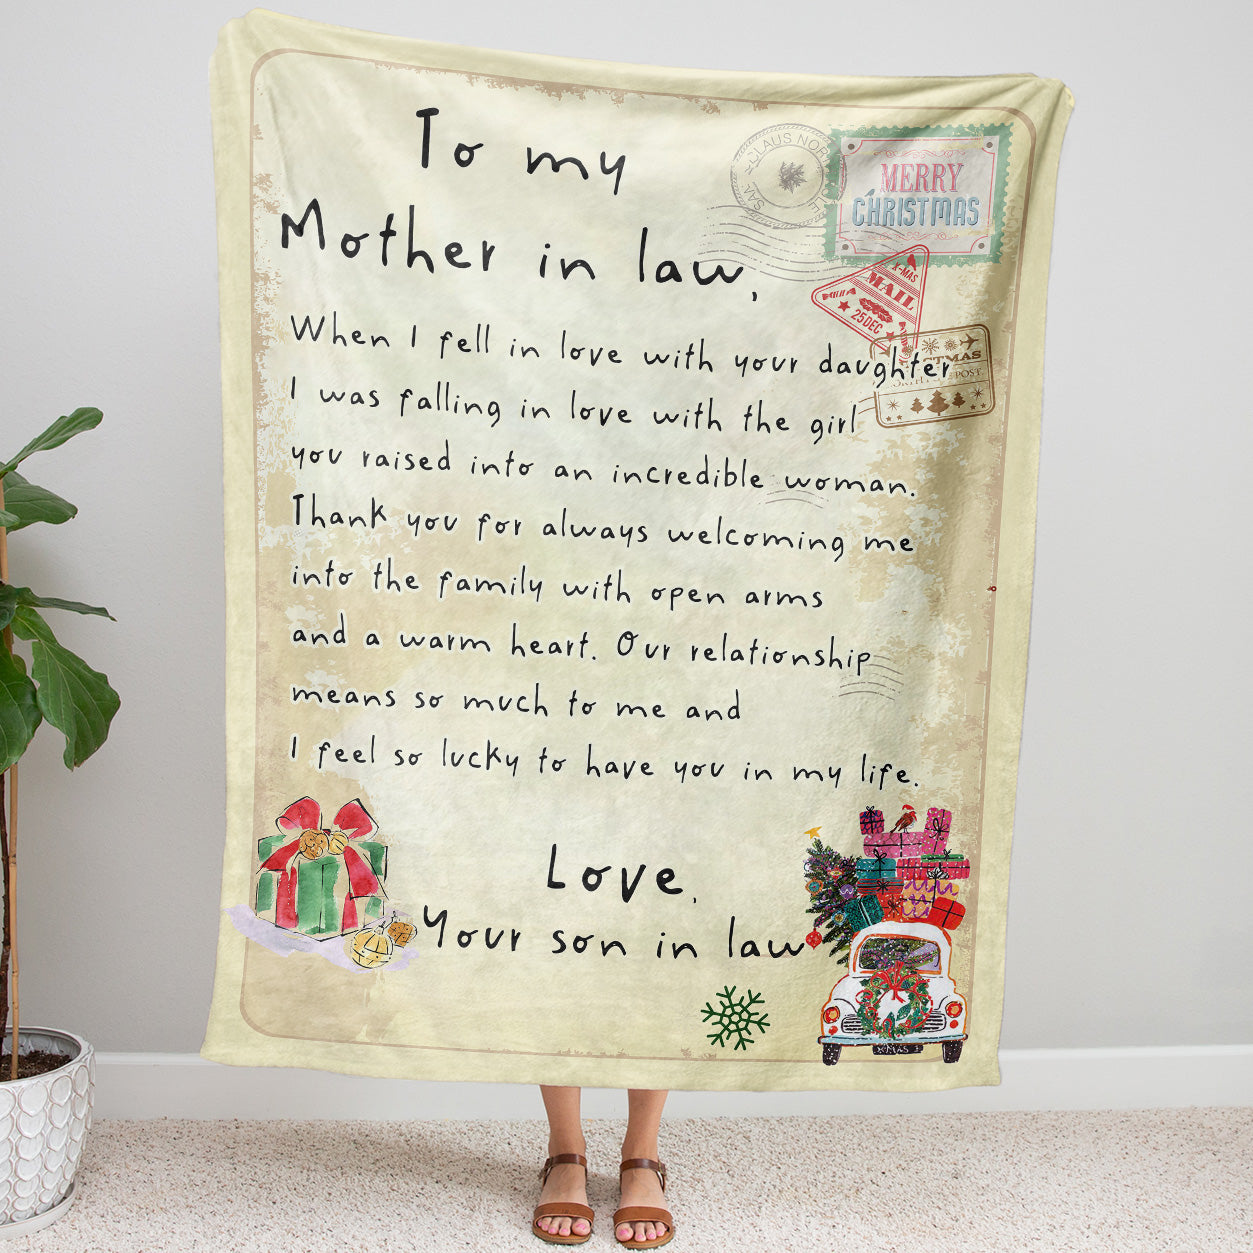 Blanket Christmas Gift ideas for Mother in Law from Son in Law Customize Personalize Love with Your Daughter 20121110 - Sherpa Blanket